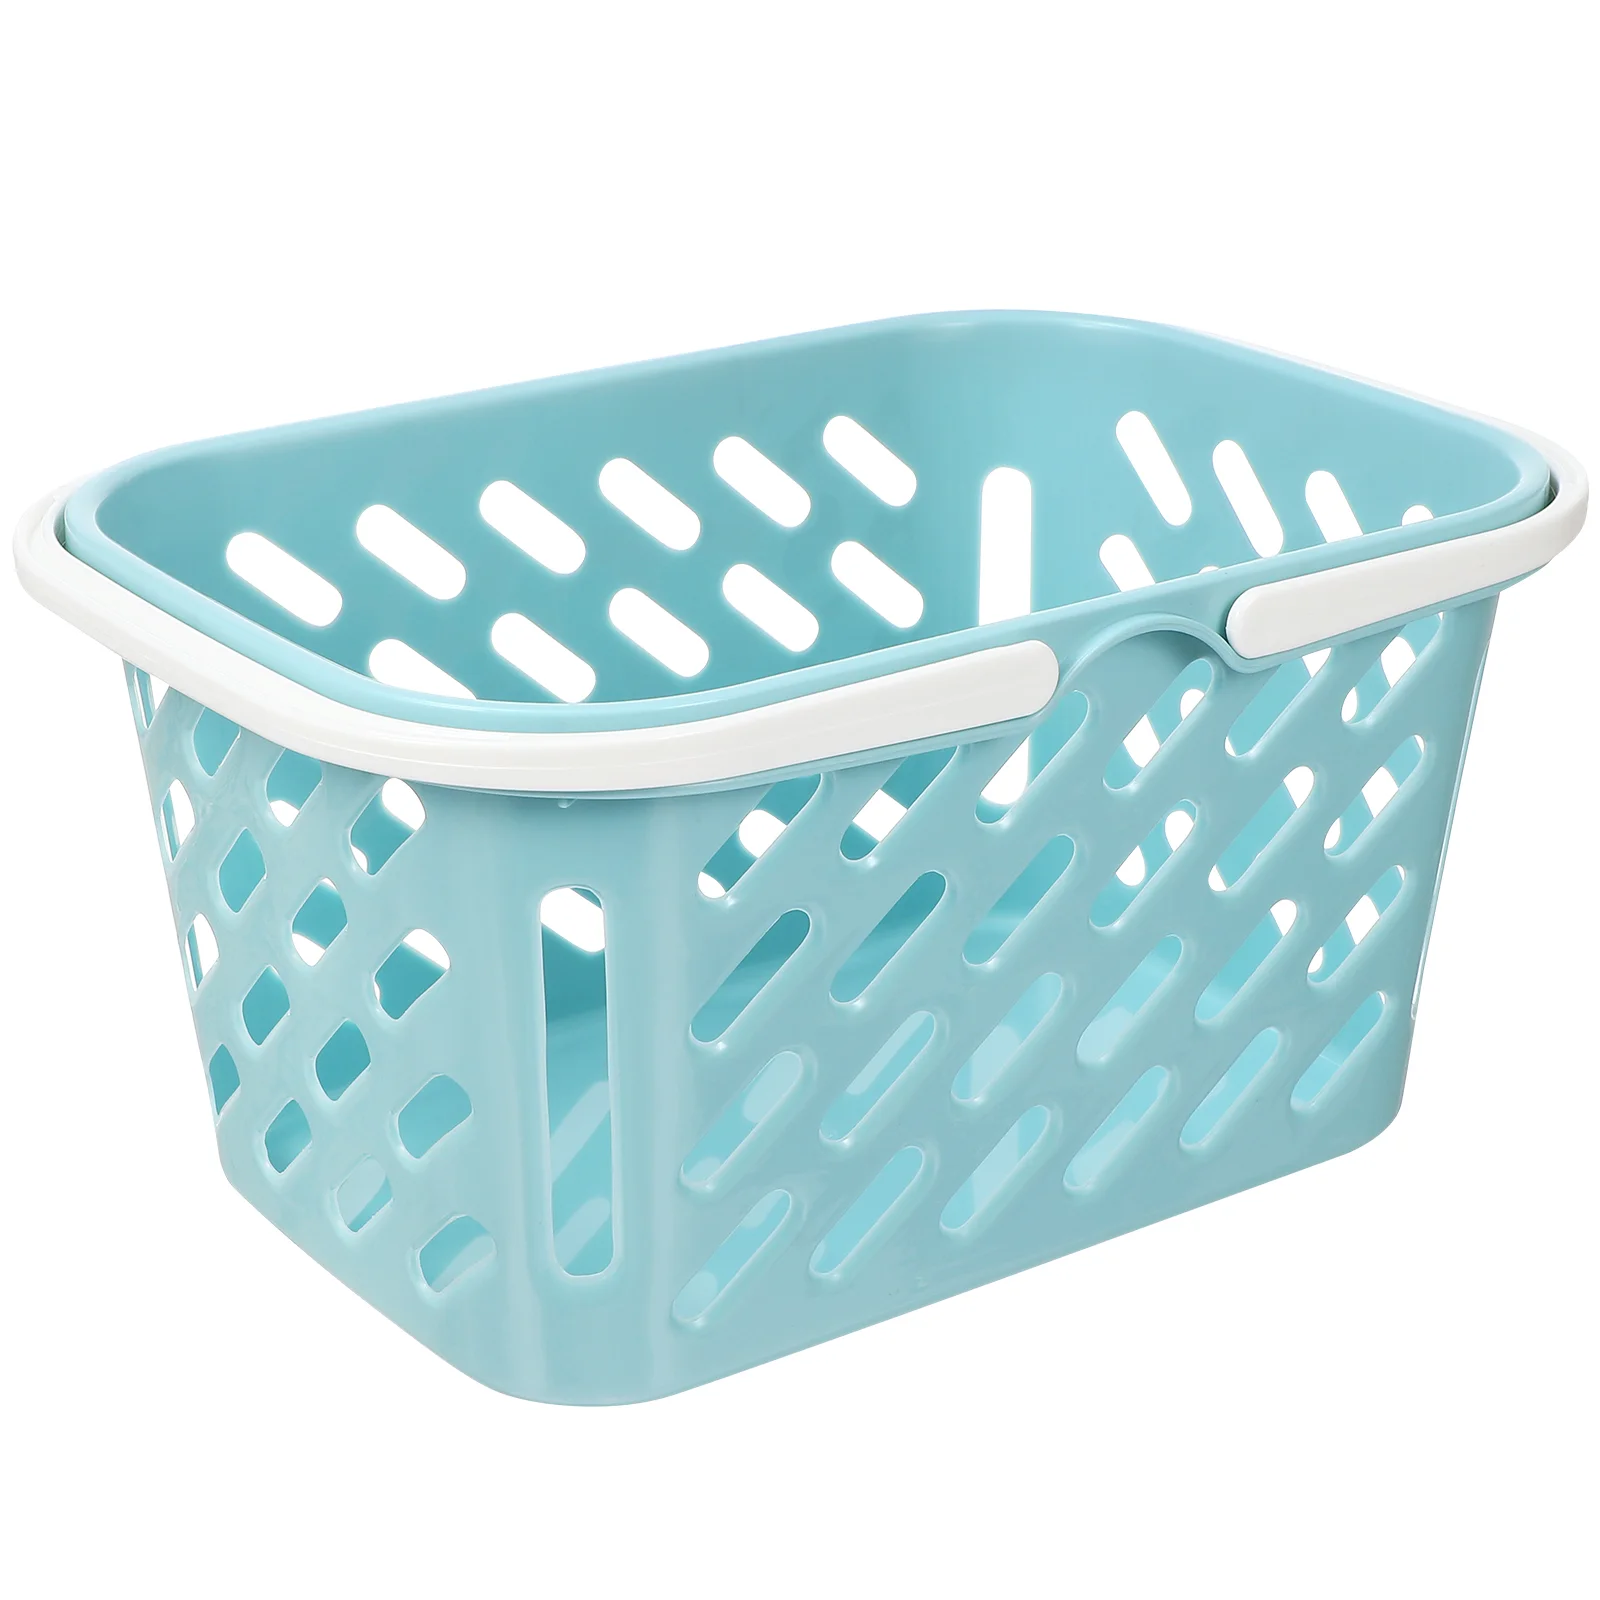 

Small Shopping Basket for Kids Plastic Grocery Basket with Handle Toy Storage Container Party Favor